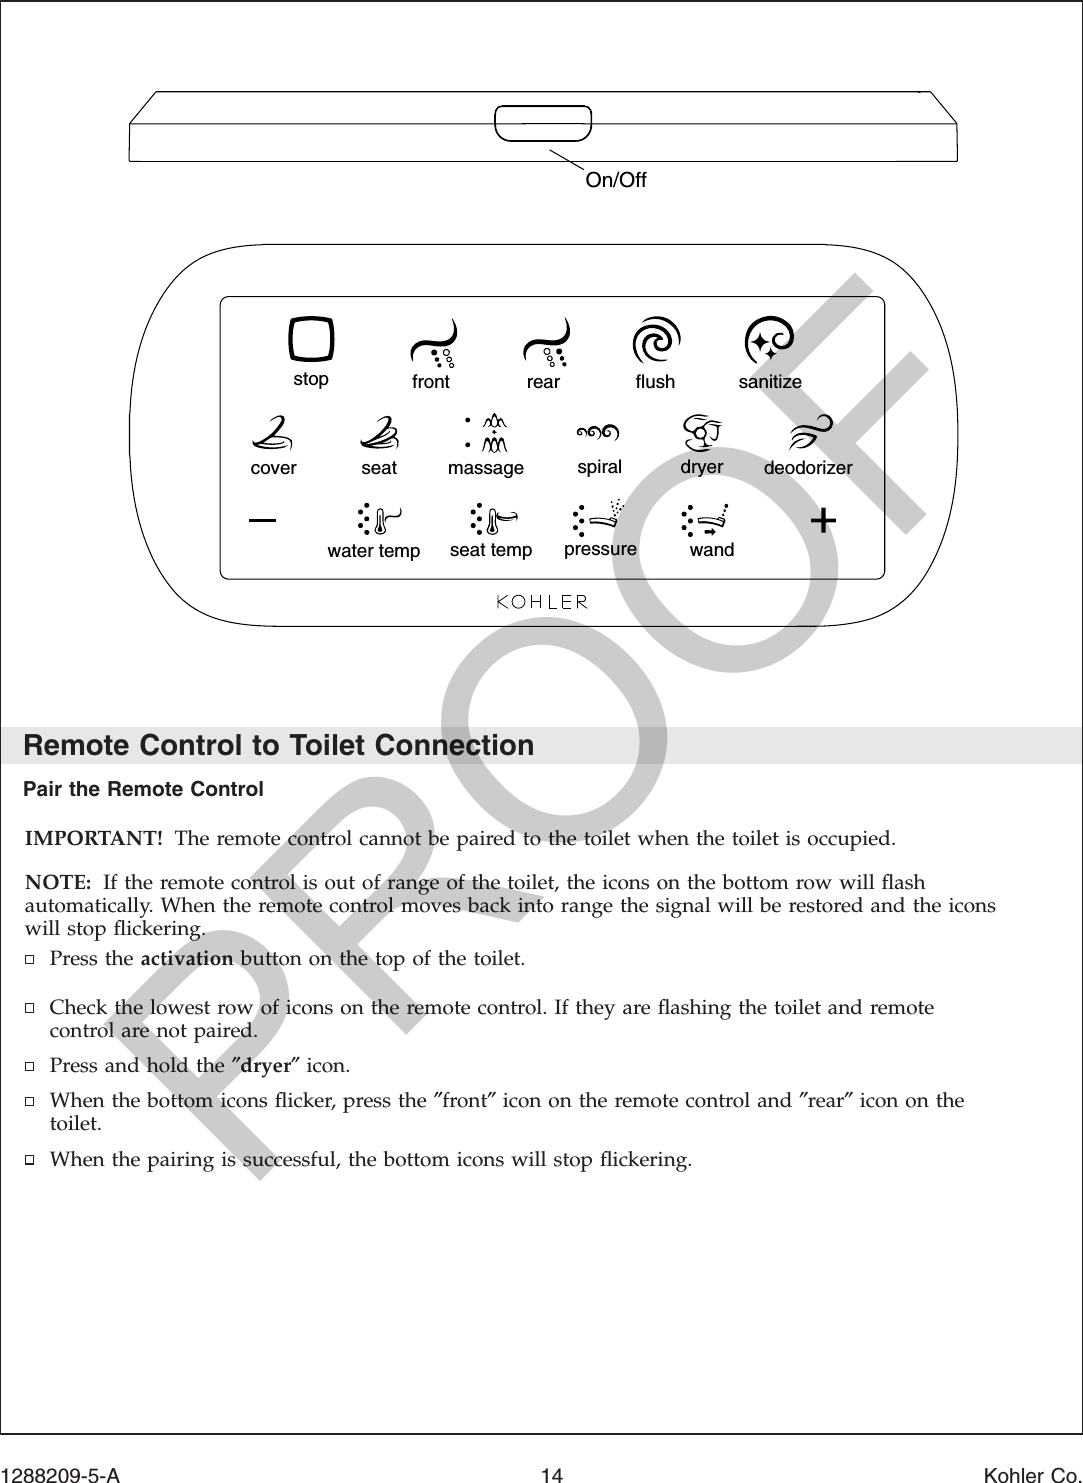 Remote Control to Toilet ConnectionPair the Remote ControlIMPORTANT! The remote control cannot be paired to the toilet when the toilet is occupied.NOTE: If the remote control is out of range of the toilet, the icons on the bottom row will ﬂashautomatically. When the remote control moves back into range the signal will be restored and the iconswill stop ﬂickering.Press the activation button on the top of the toilet.Check the lowest row of icons on the remote control. If they are ﬂashing the toilet and remotecontrol are not paired.Press and hold the ″dryer″icon.When the bottom icons ﬂicker, press the ″front″icon on the remote control and ″rear″icon on thetoilet.When the pairing is successful, the bottom icons will stop ﬂickering.stop rearfront flush sanitizecover seat massage spiral dryer deodorizerwater temp pressure wandseat tempOn/Off1288209-5-A 14 Kohler Co.PROOF